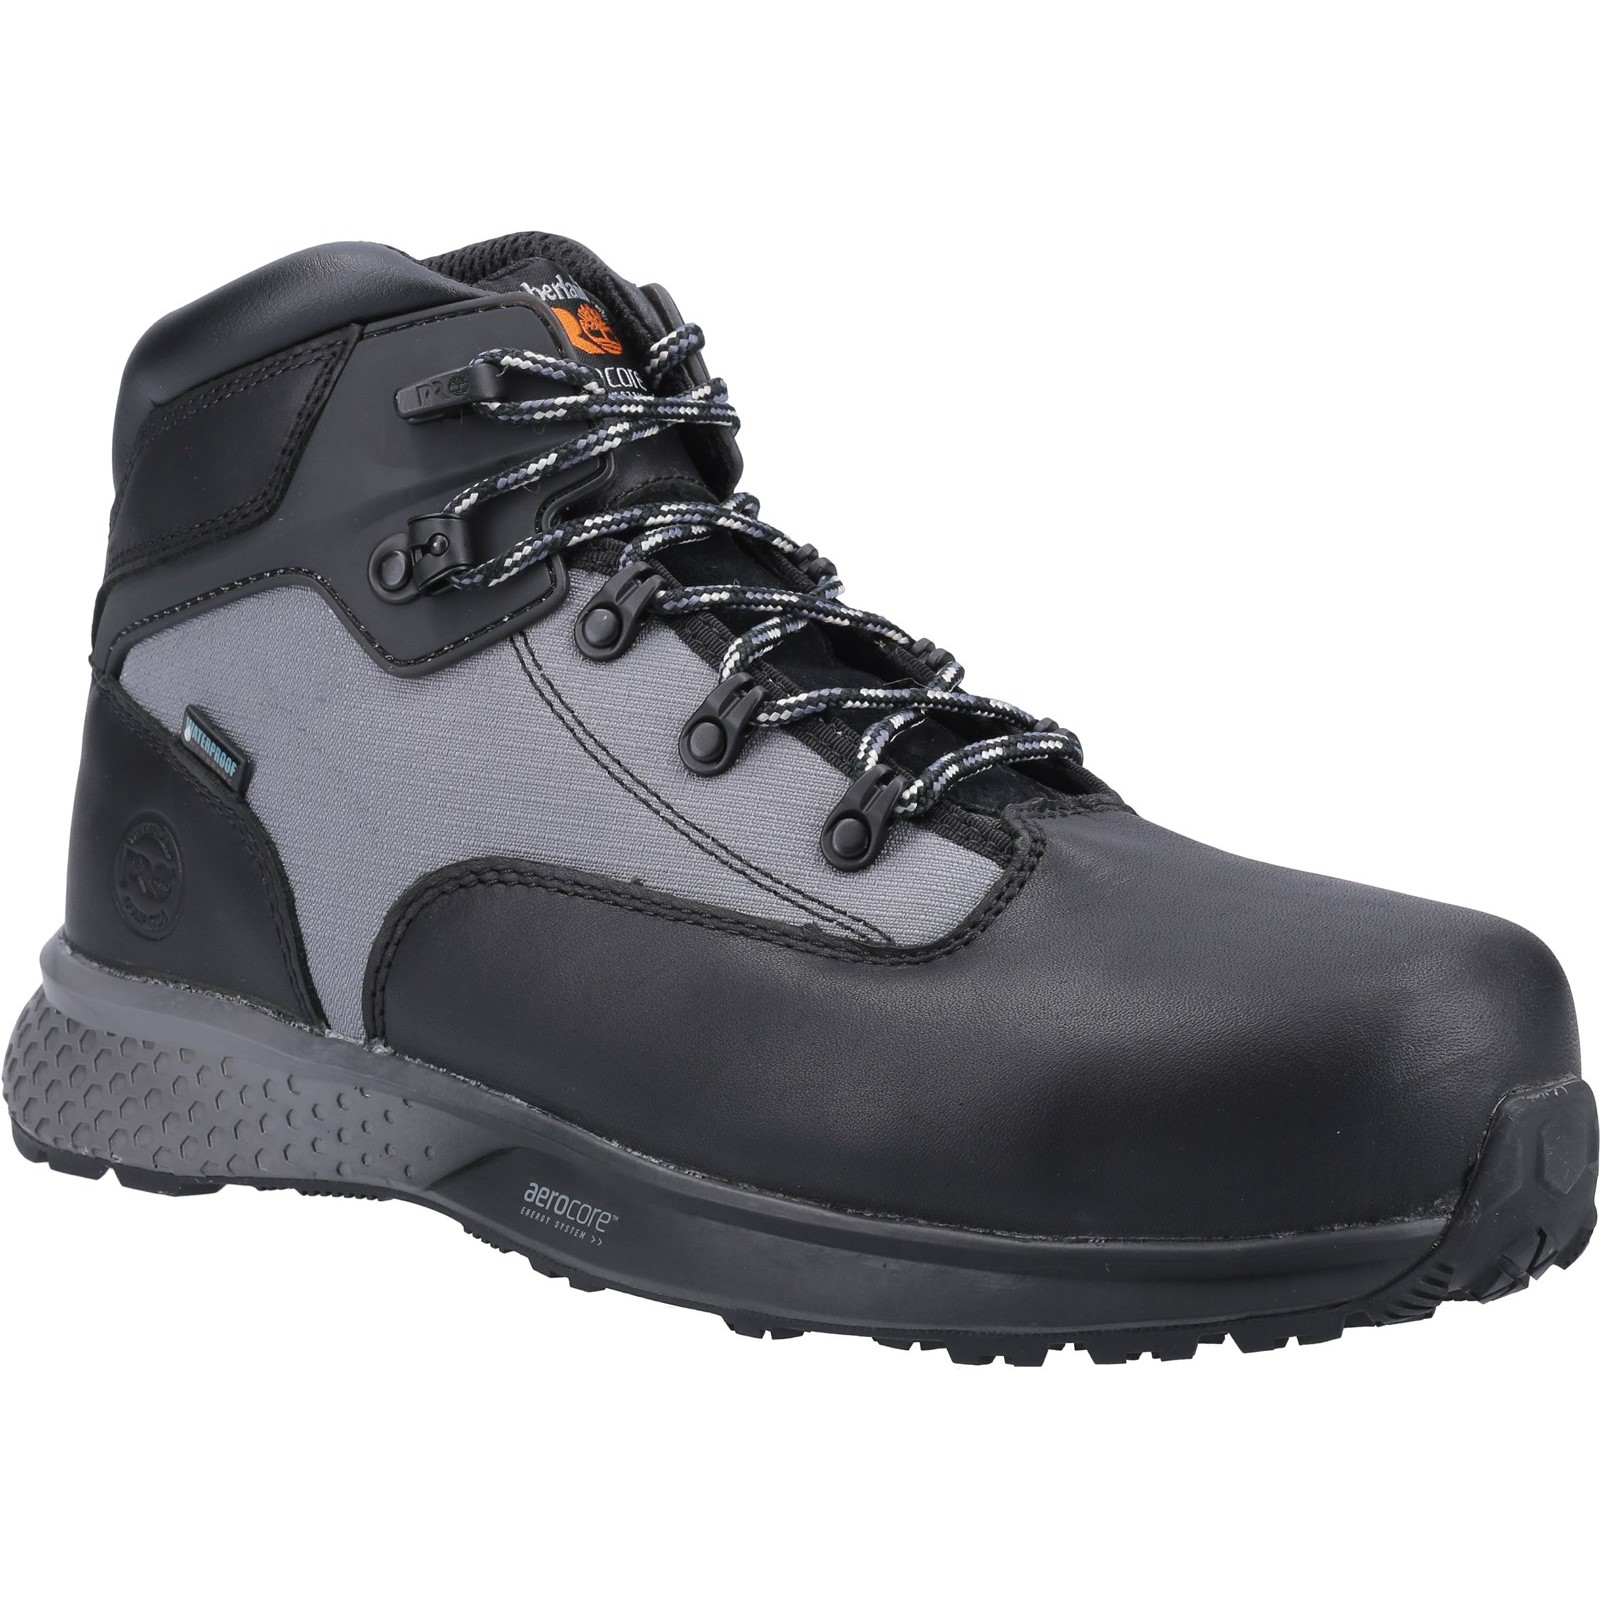 Euro Hiker Composite Safety Boot Black/Grey